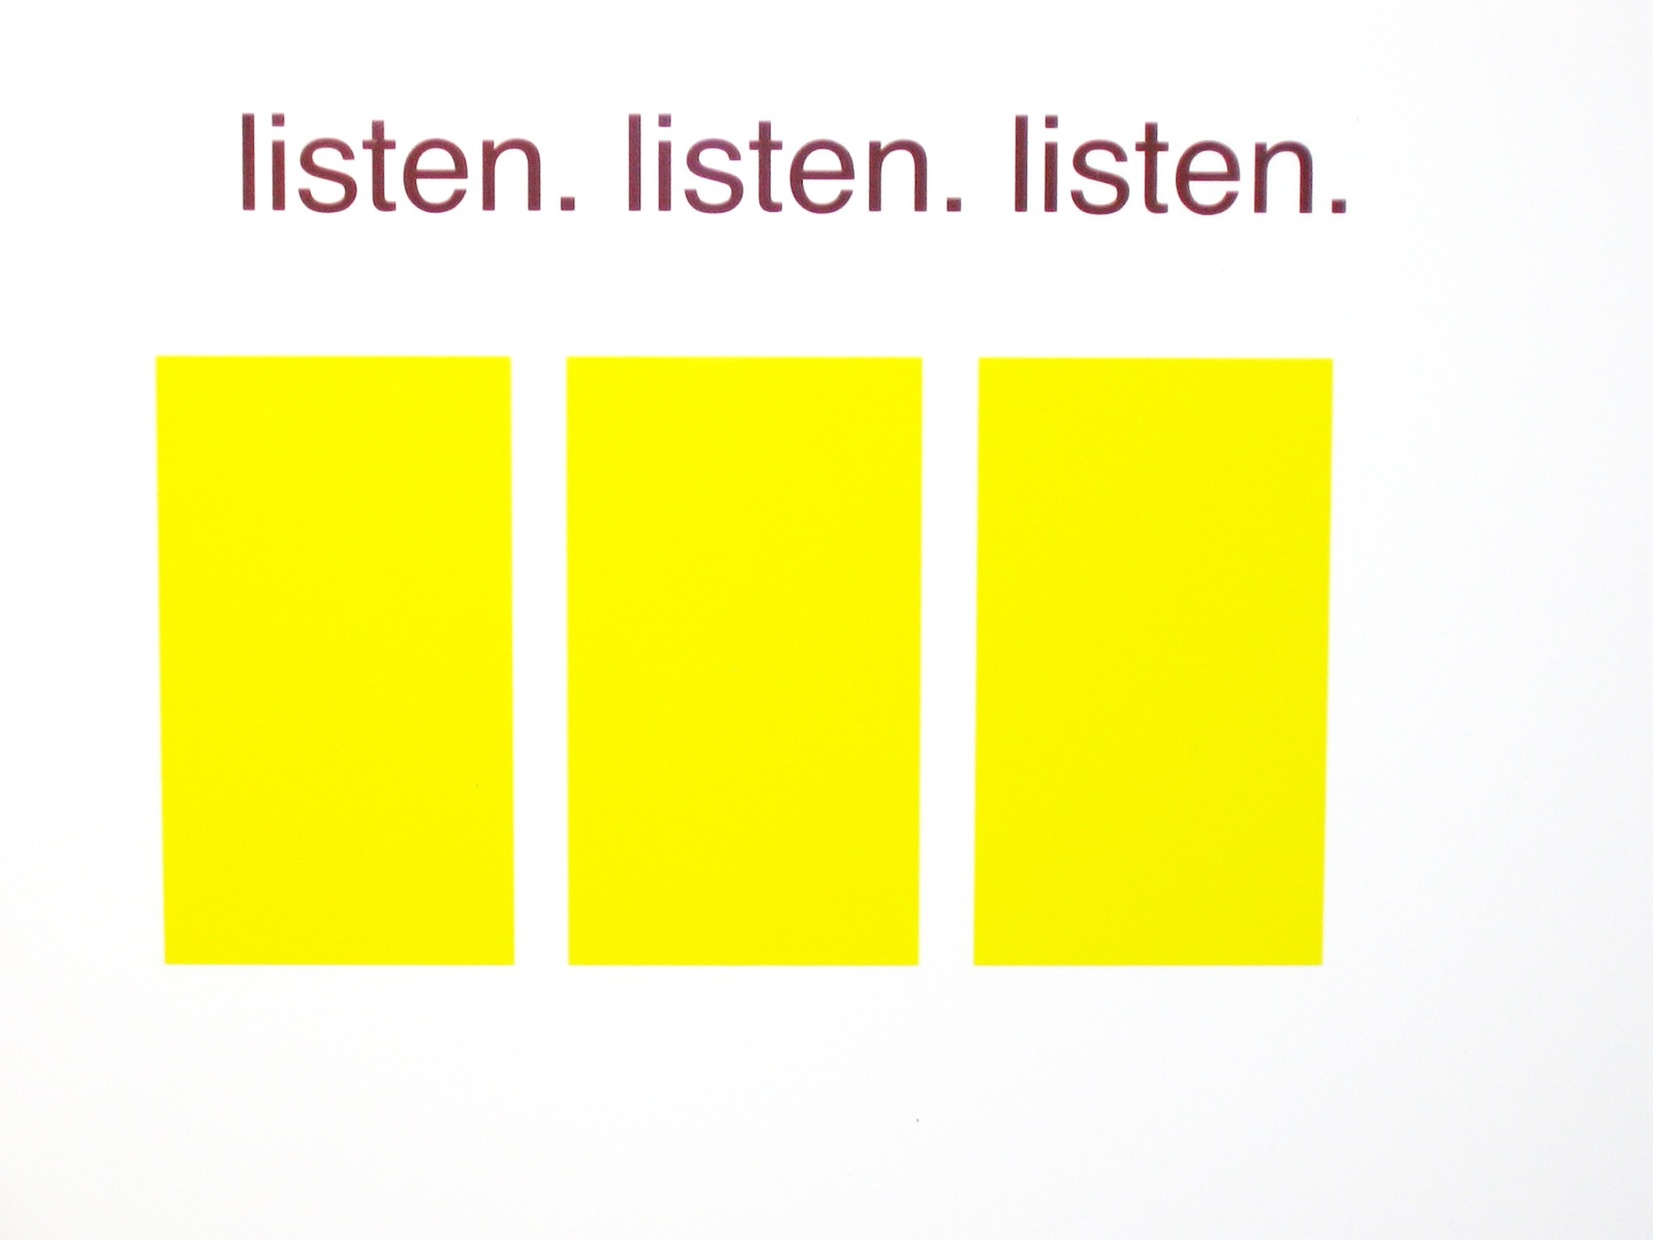 A print of three, yellow rectangles next to each other with text "listen. listen. listen." in purple above them.